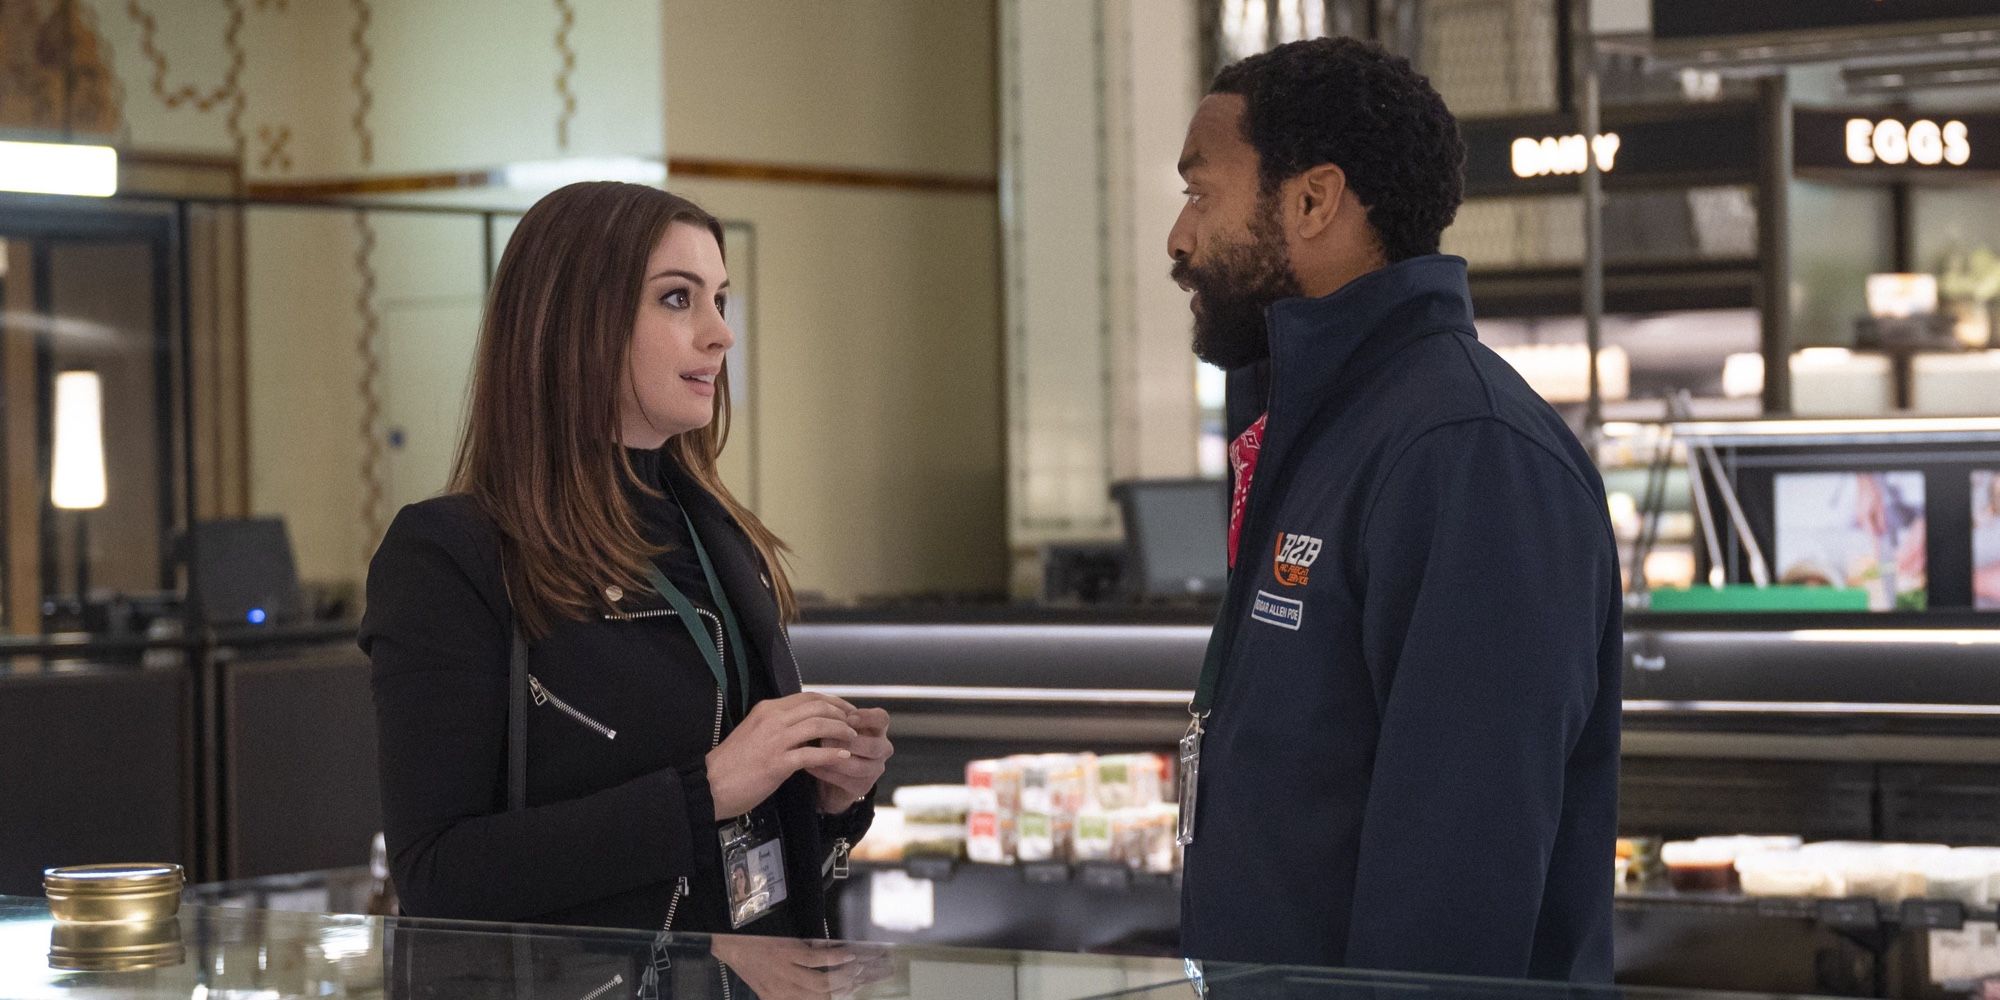 Anne Hathaway and Chiwetel Ejiofor in Locked Down